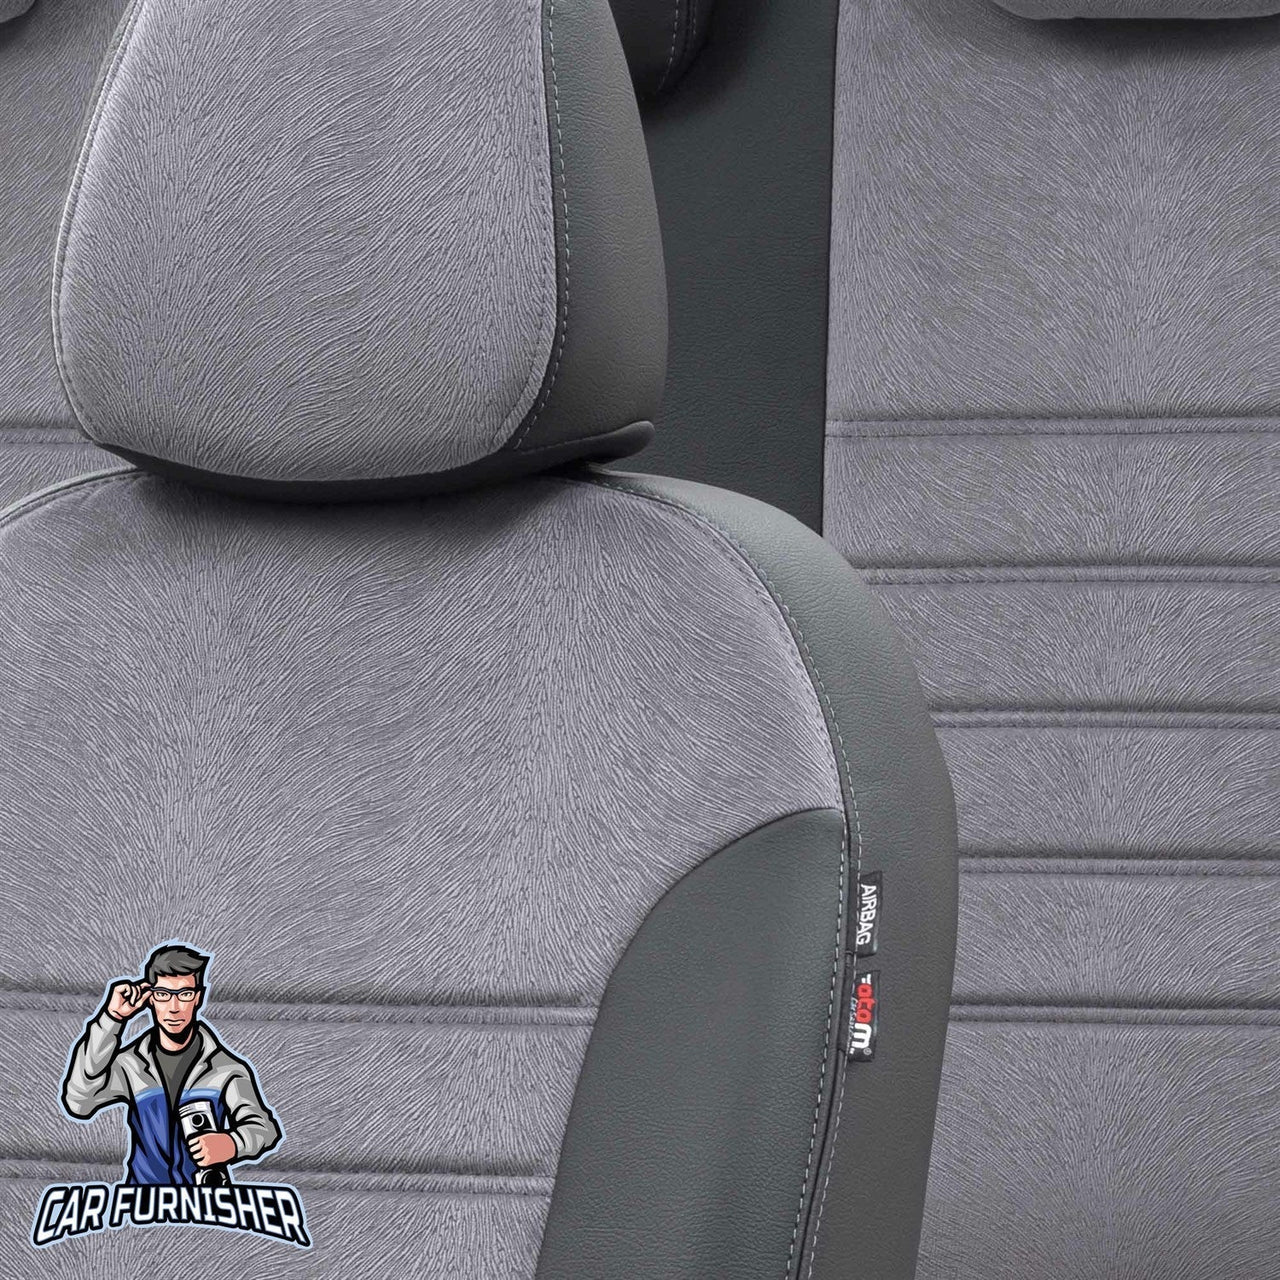 Chevrolet Spark Seat Covers London Foal Feather Design Smoked Black Leather & Foal Feather